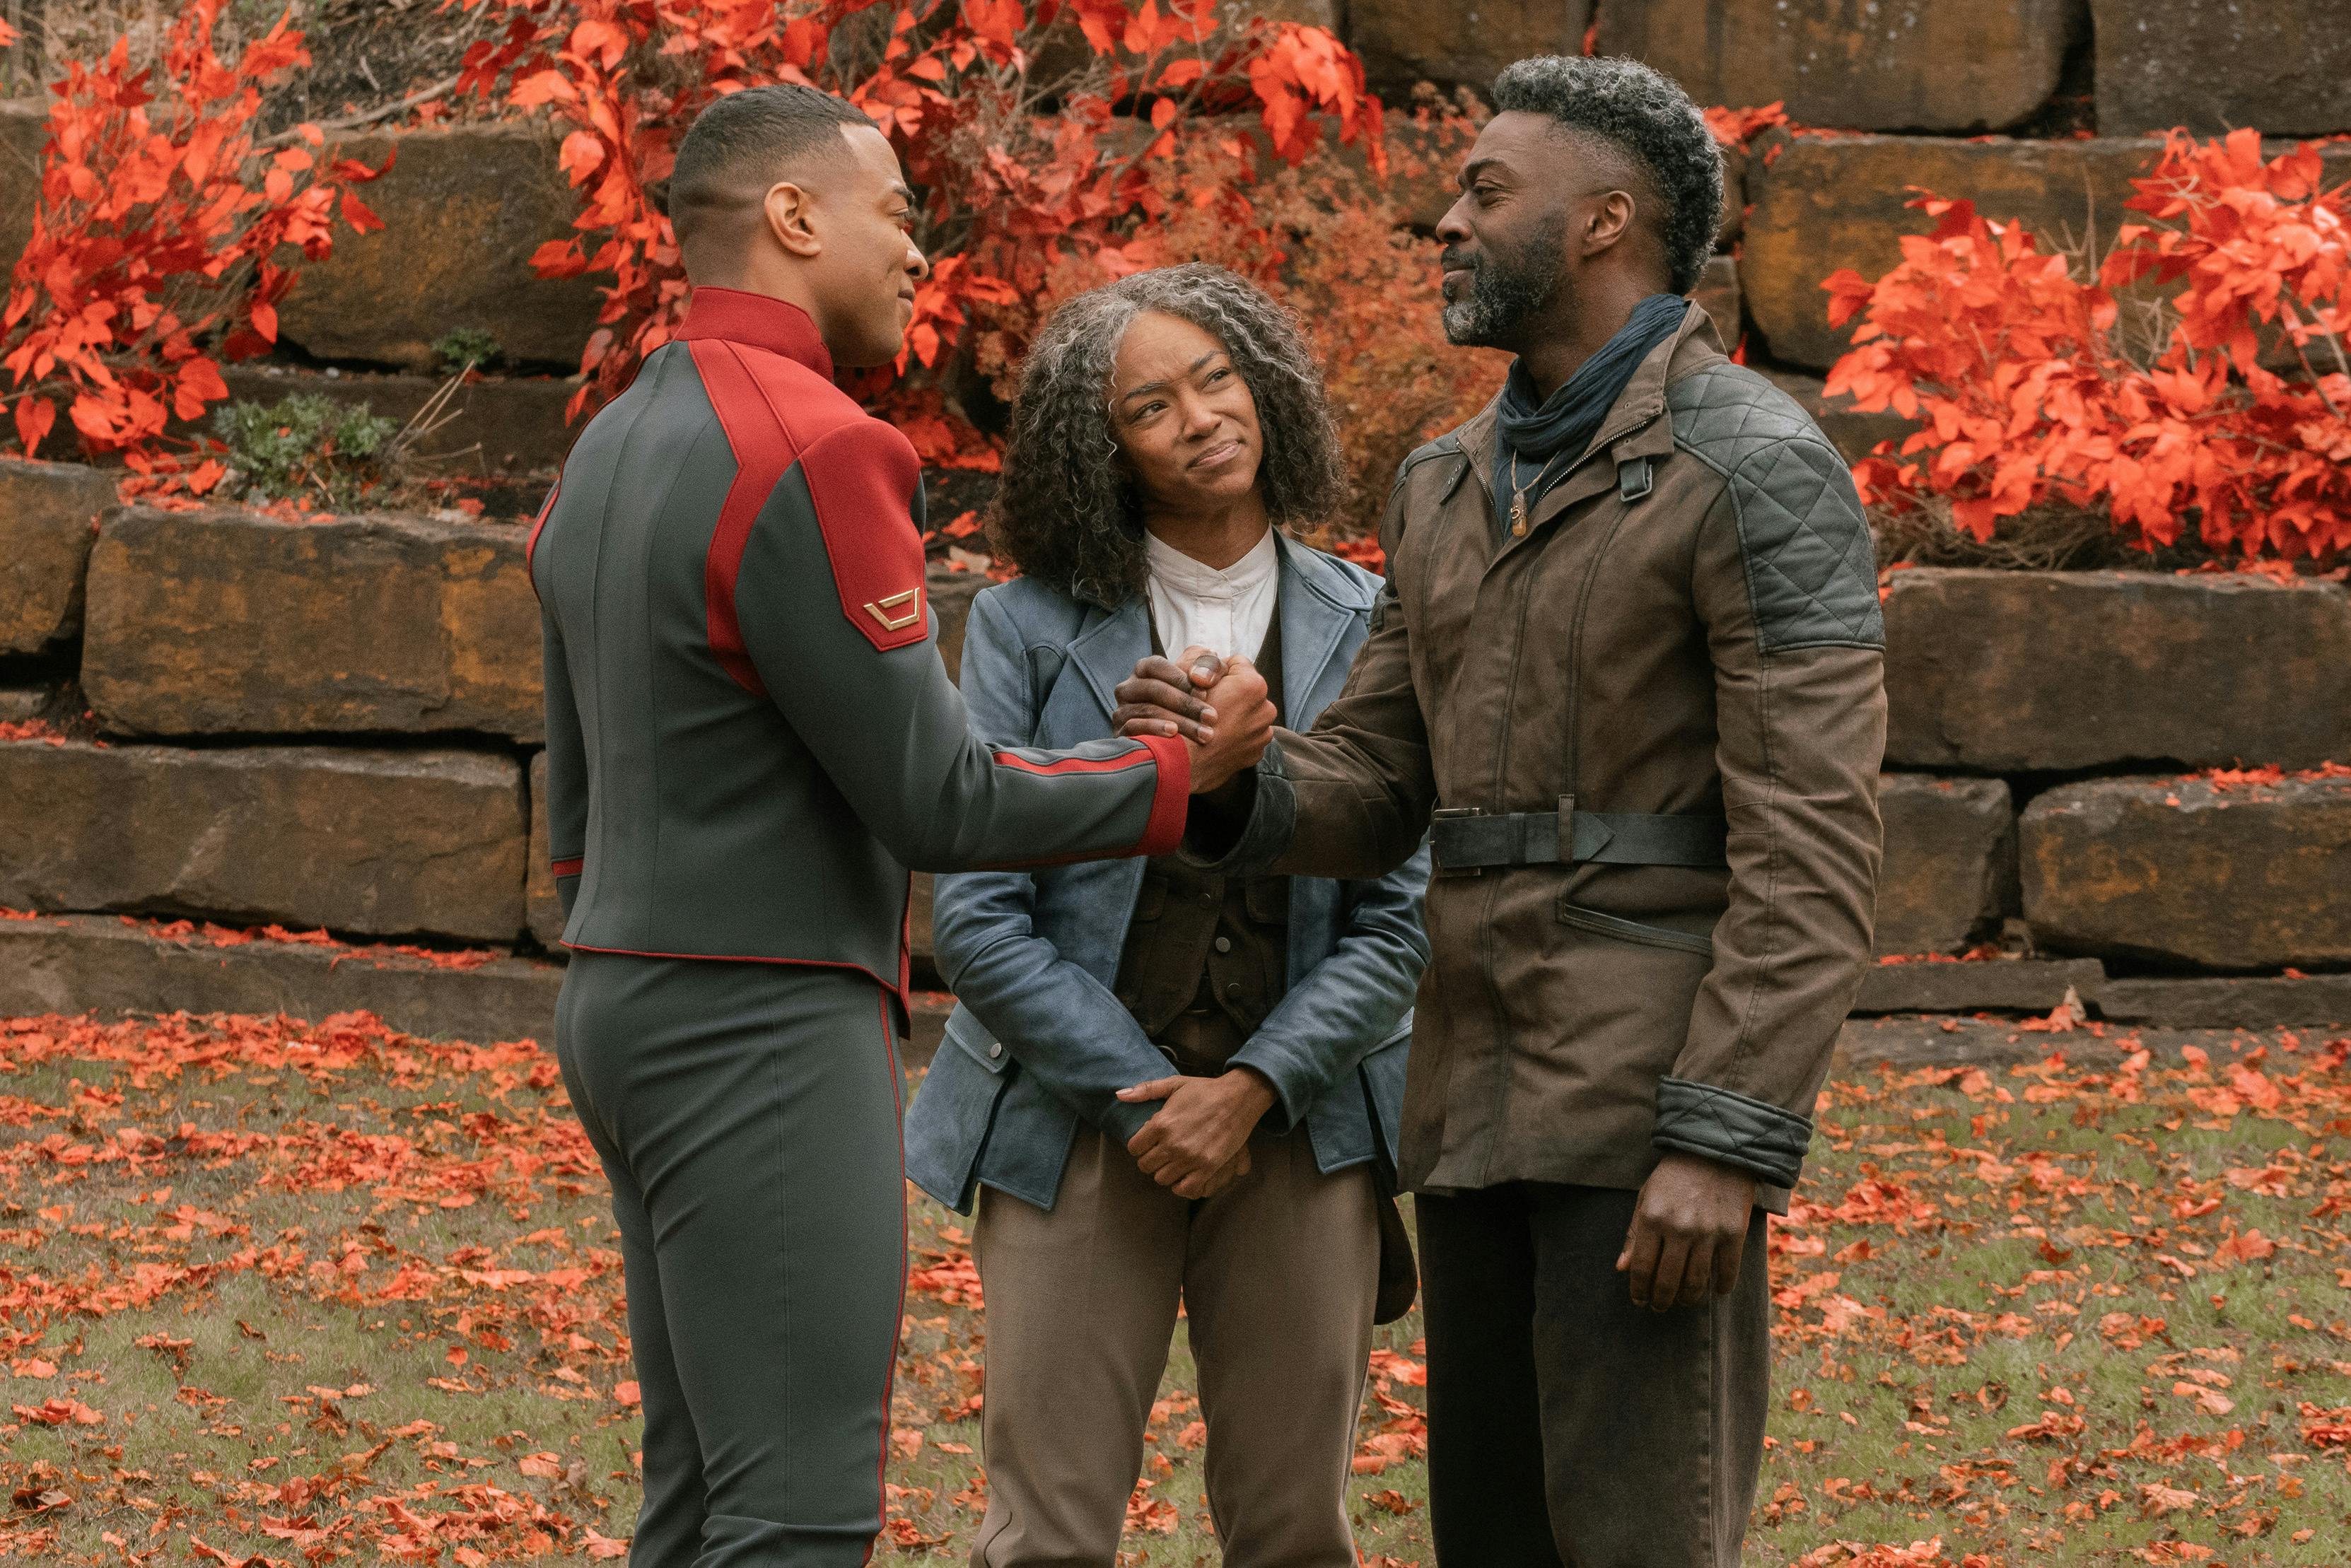 Sometime in the future, Captain Leto arrives at his parent's home and greets Michael Burnham and Booker in their front yard in 'Life, Itself'